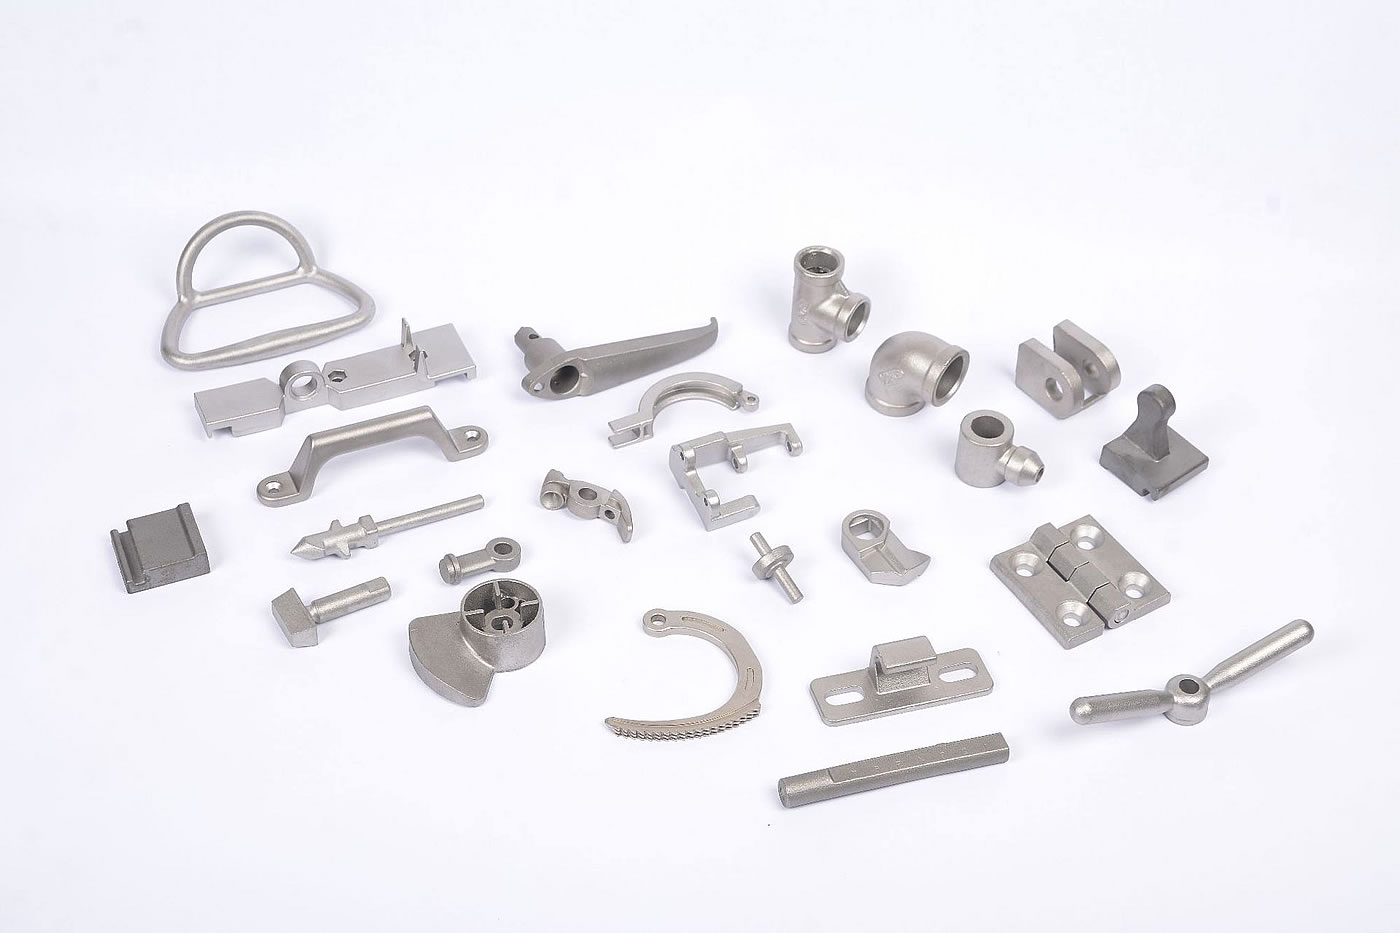 What You Need to Know When Choosing Casting Product Manufacturers